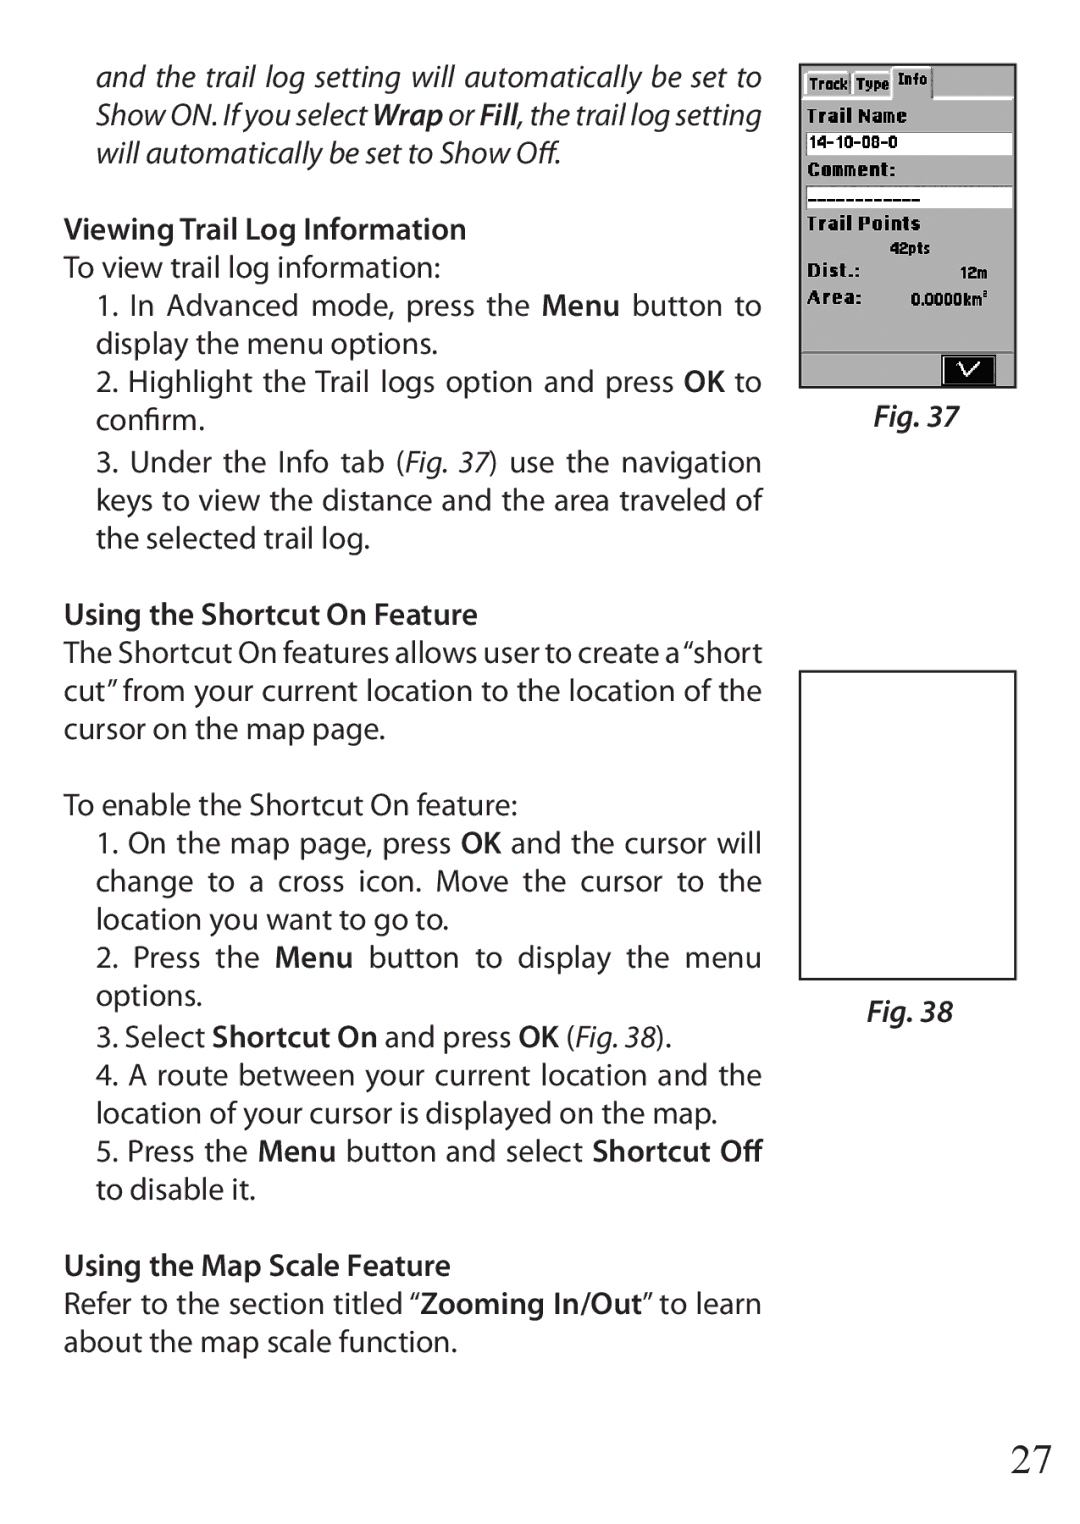 Bushnell 110 instruction manual Viewing Trail Log Information, Using the Shortcut On Feature, Using the Map Scale Feature 